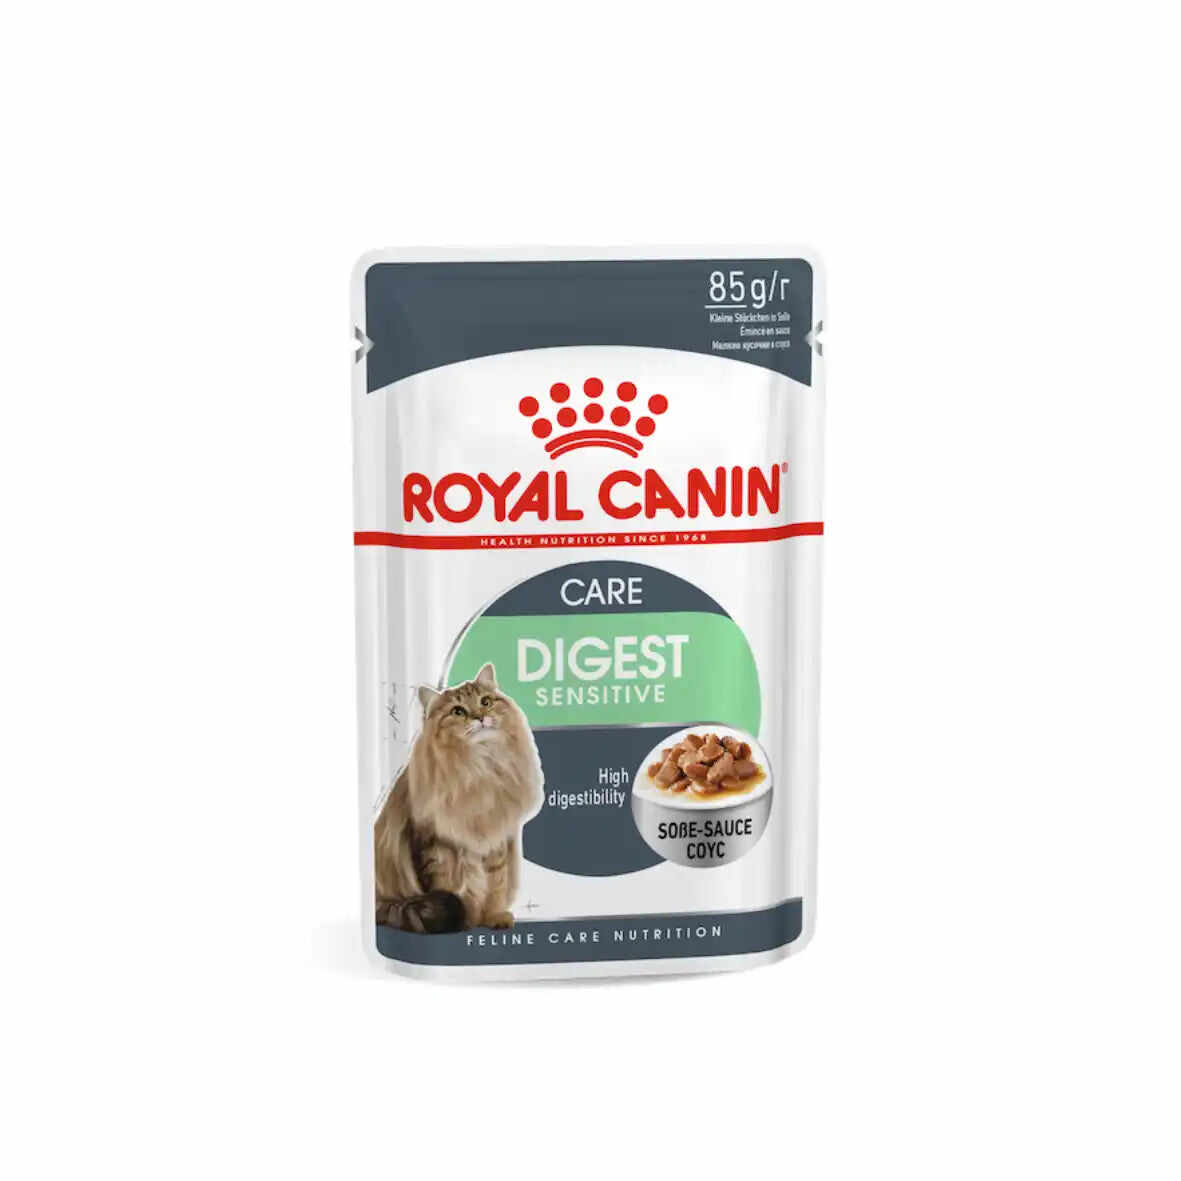 Royal Canin - Care Digestive Sensitive Care Adult Cat Wet Food in Gravy 85g